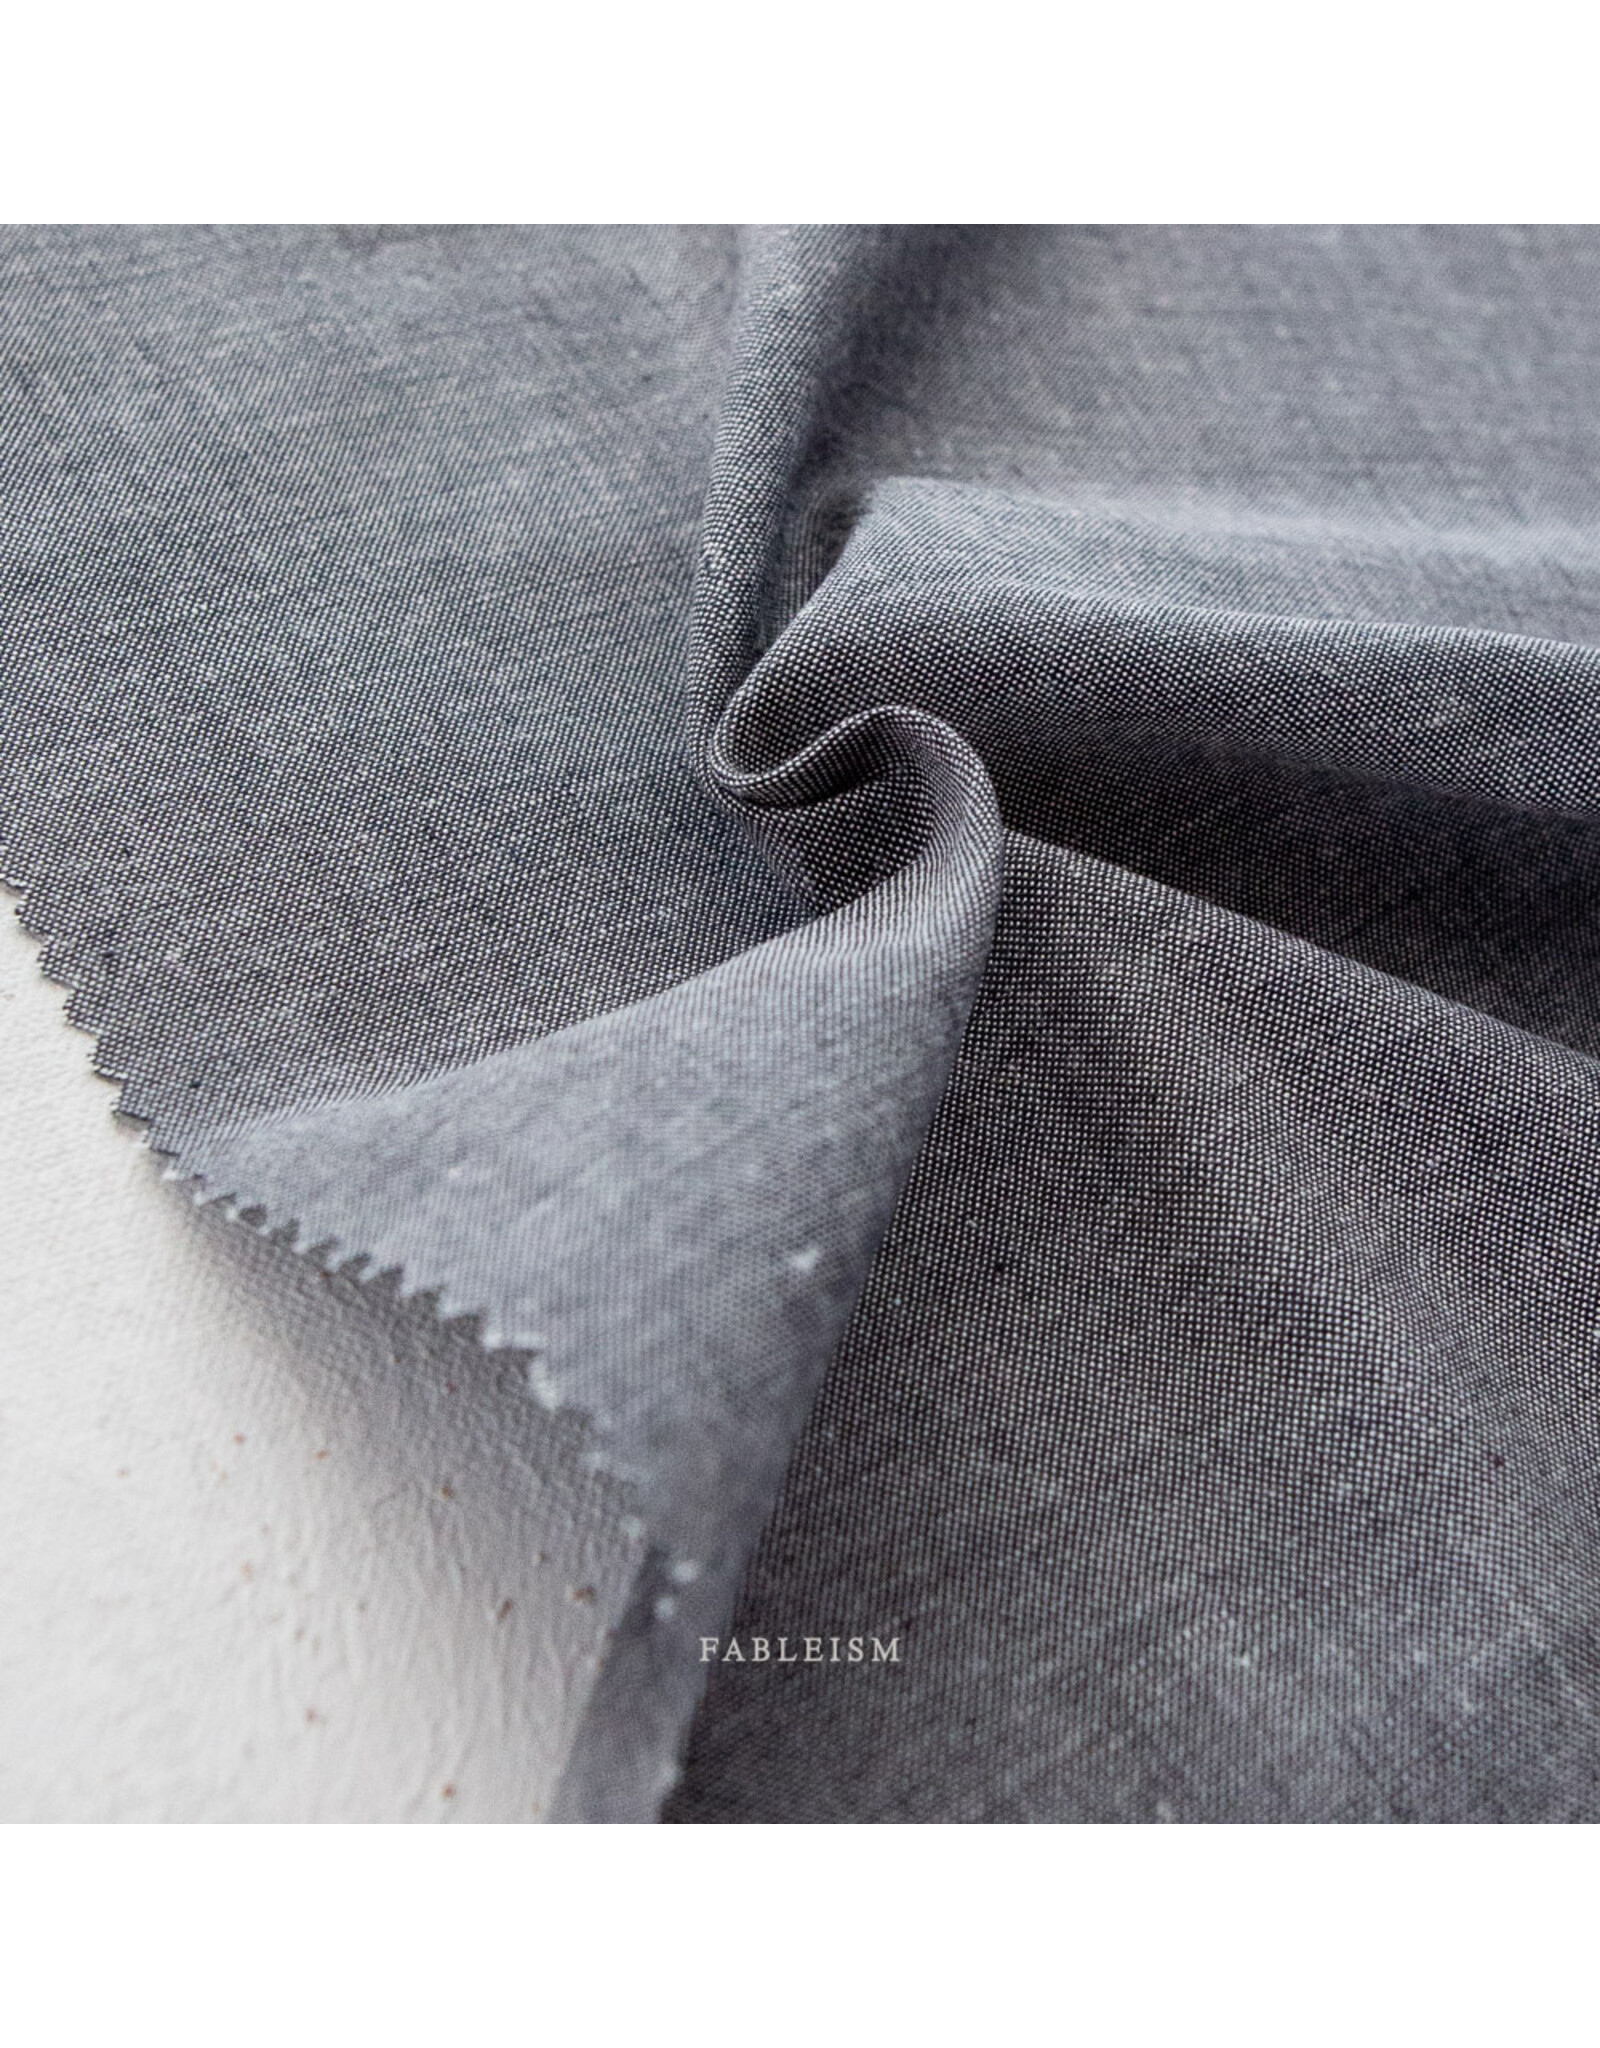 Fableism Everyday Chambray, Obsidian, Fabric Half-Yards